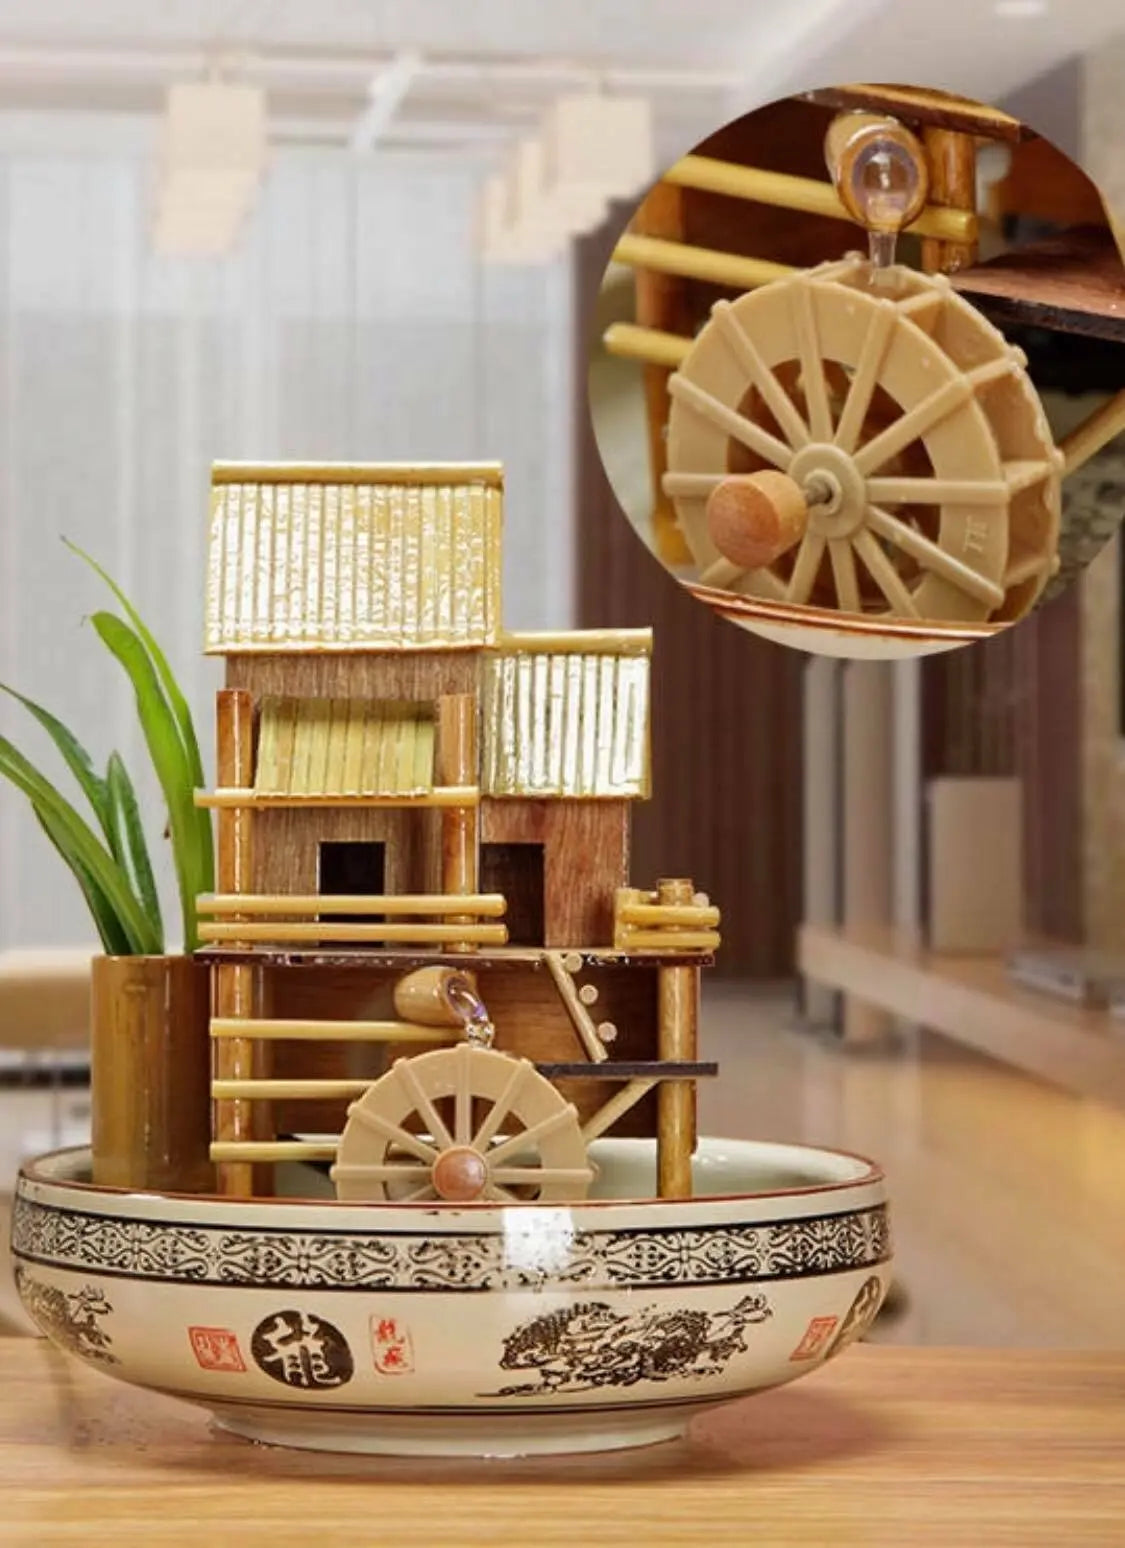 Bamboo Handmade Handcrafted Indoor Water Feature Flowing Water Wheels Home Decor everythingbamboo